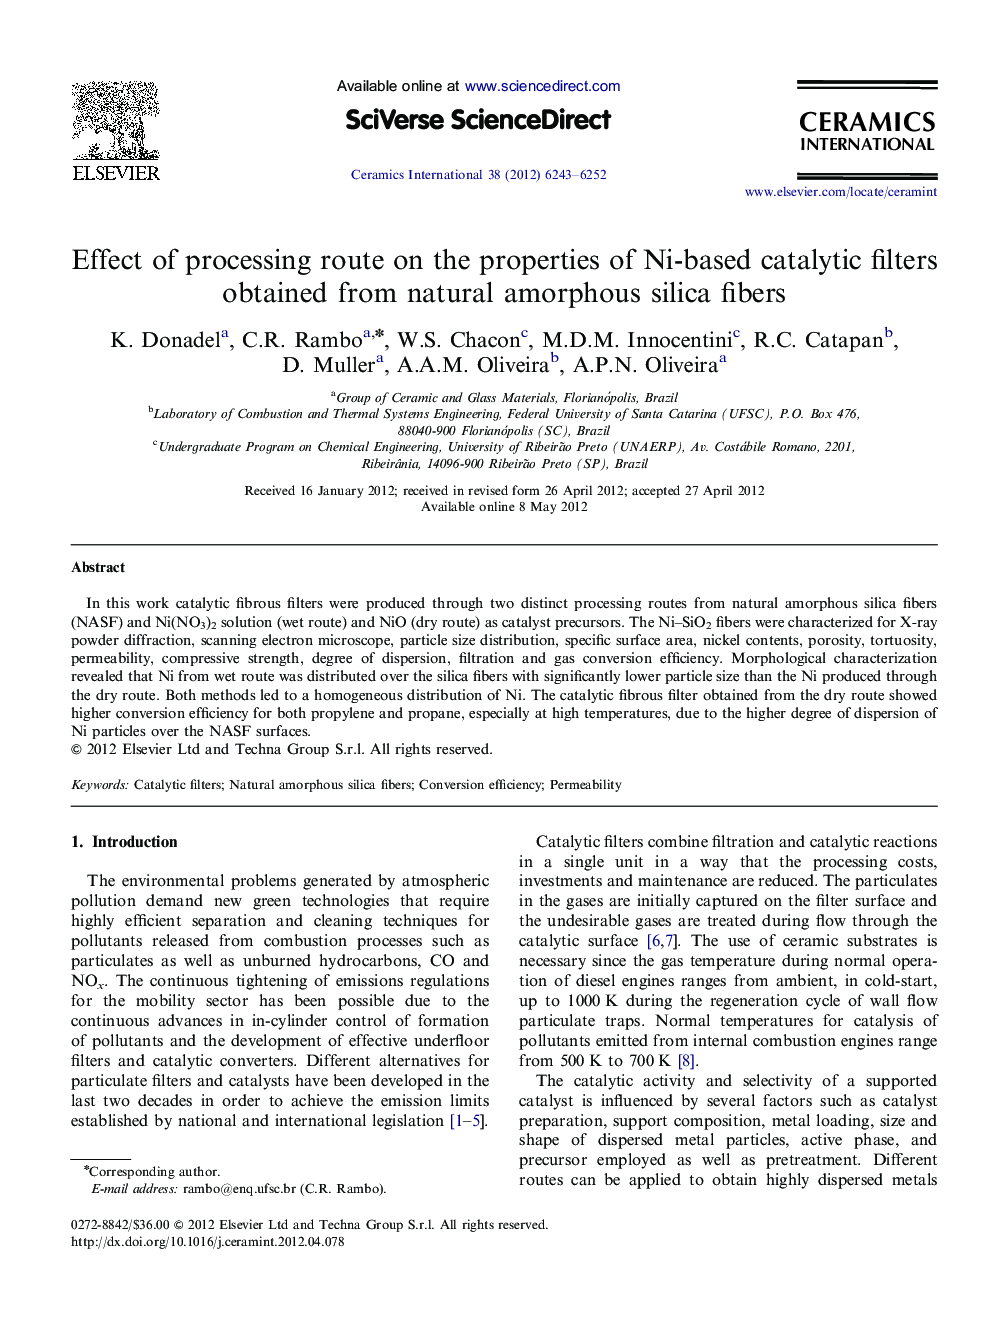 Effect of processing route on the properties of Ni-based catalytic filters obtained from natural amorphous silica fibers